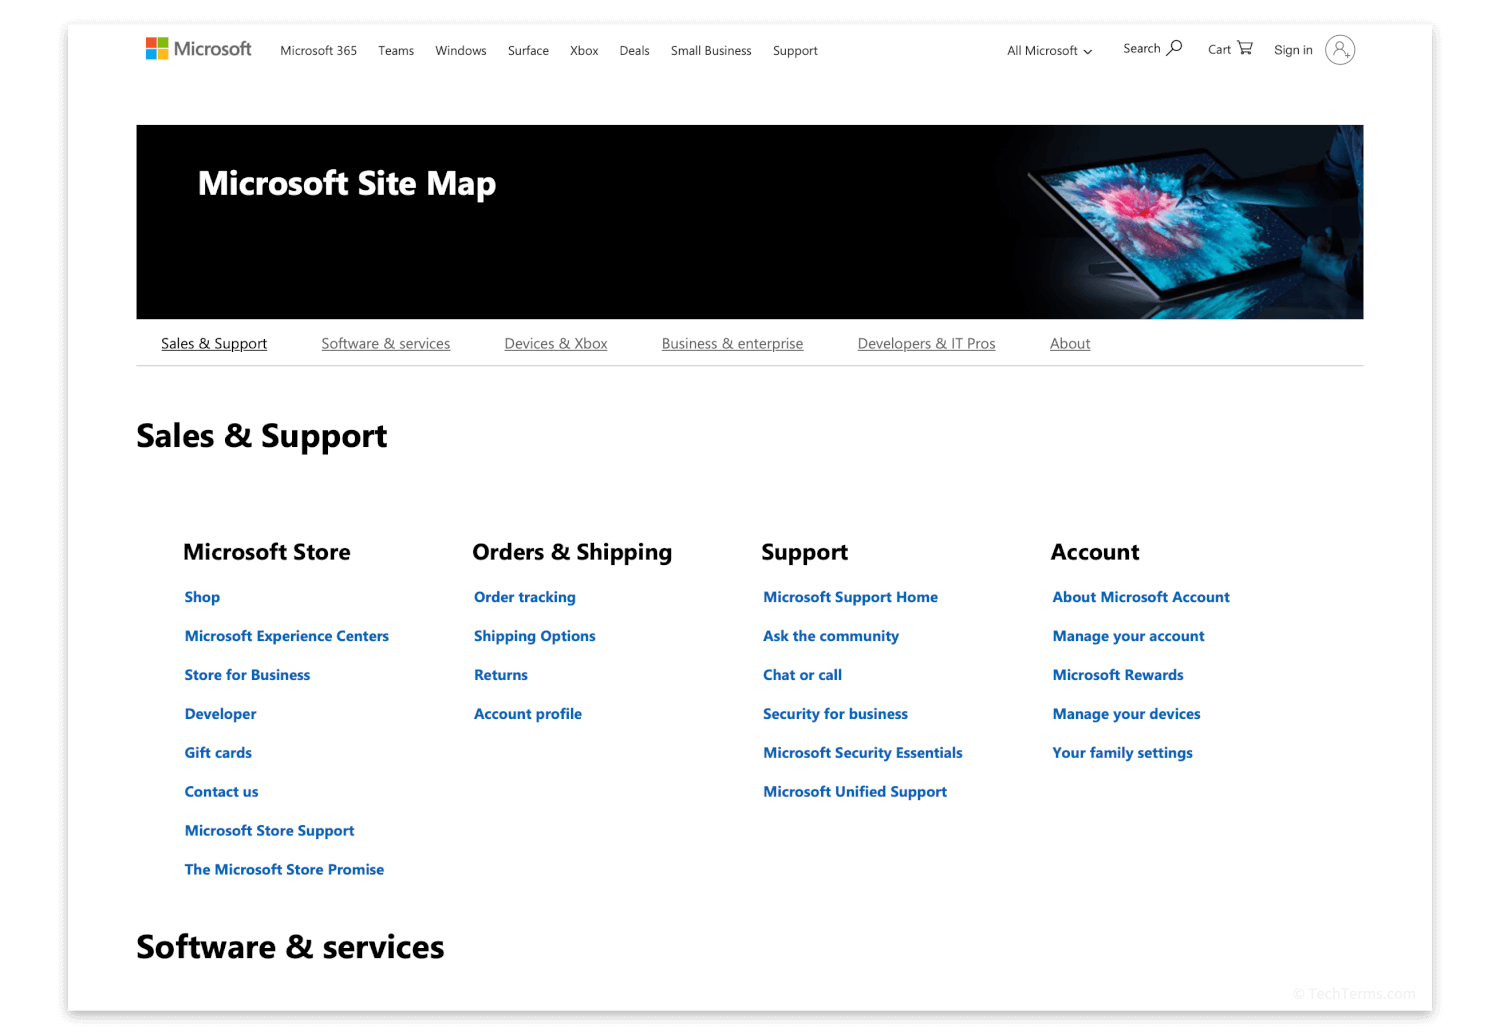 The sitemap page for Microsoft's website, which displays links to important pages organized by category